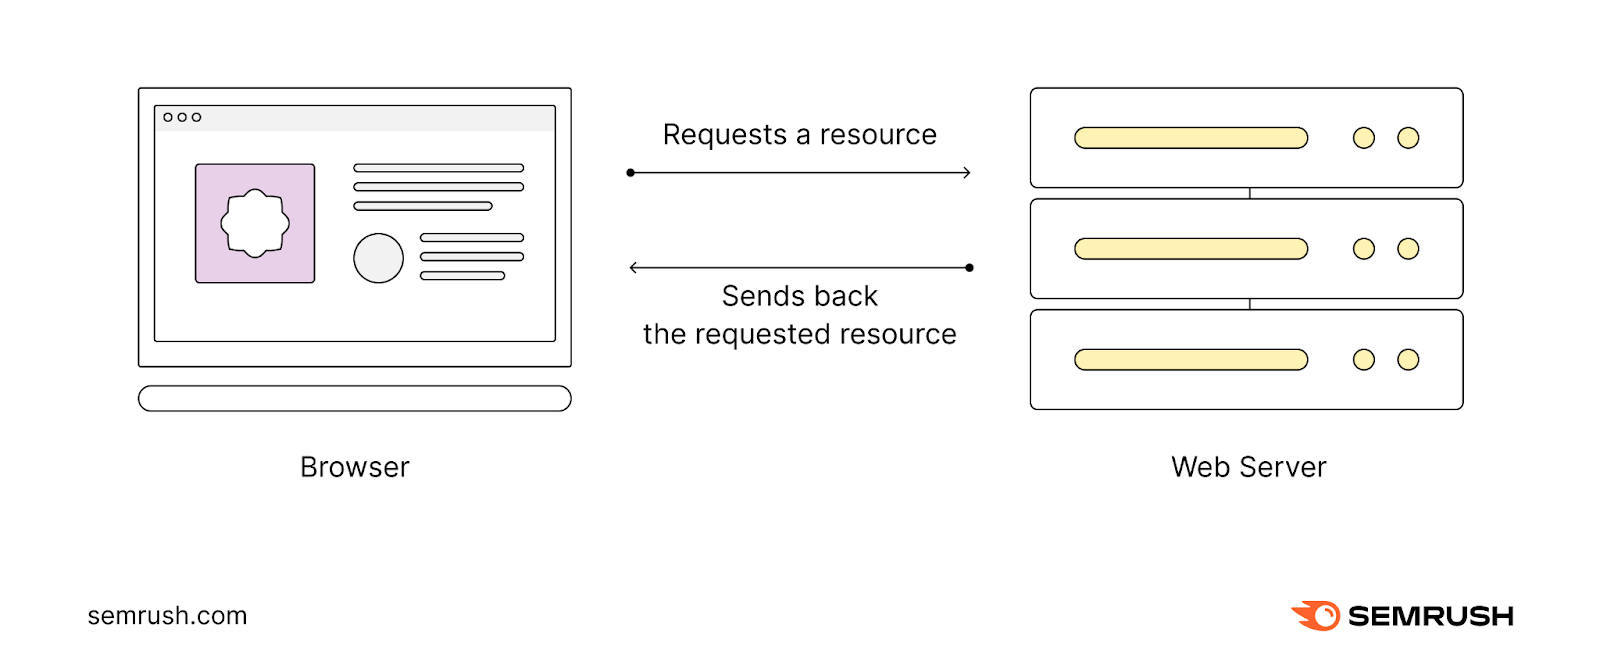 An illustration of a browser requesting a resource from the server, and the server sending back the resource